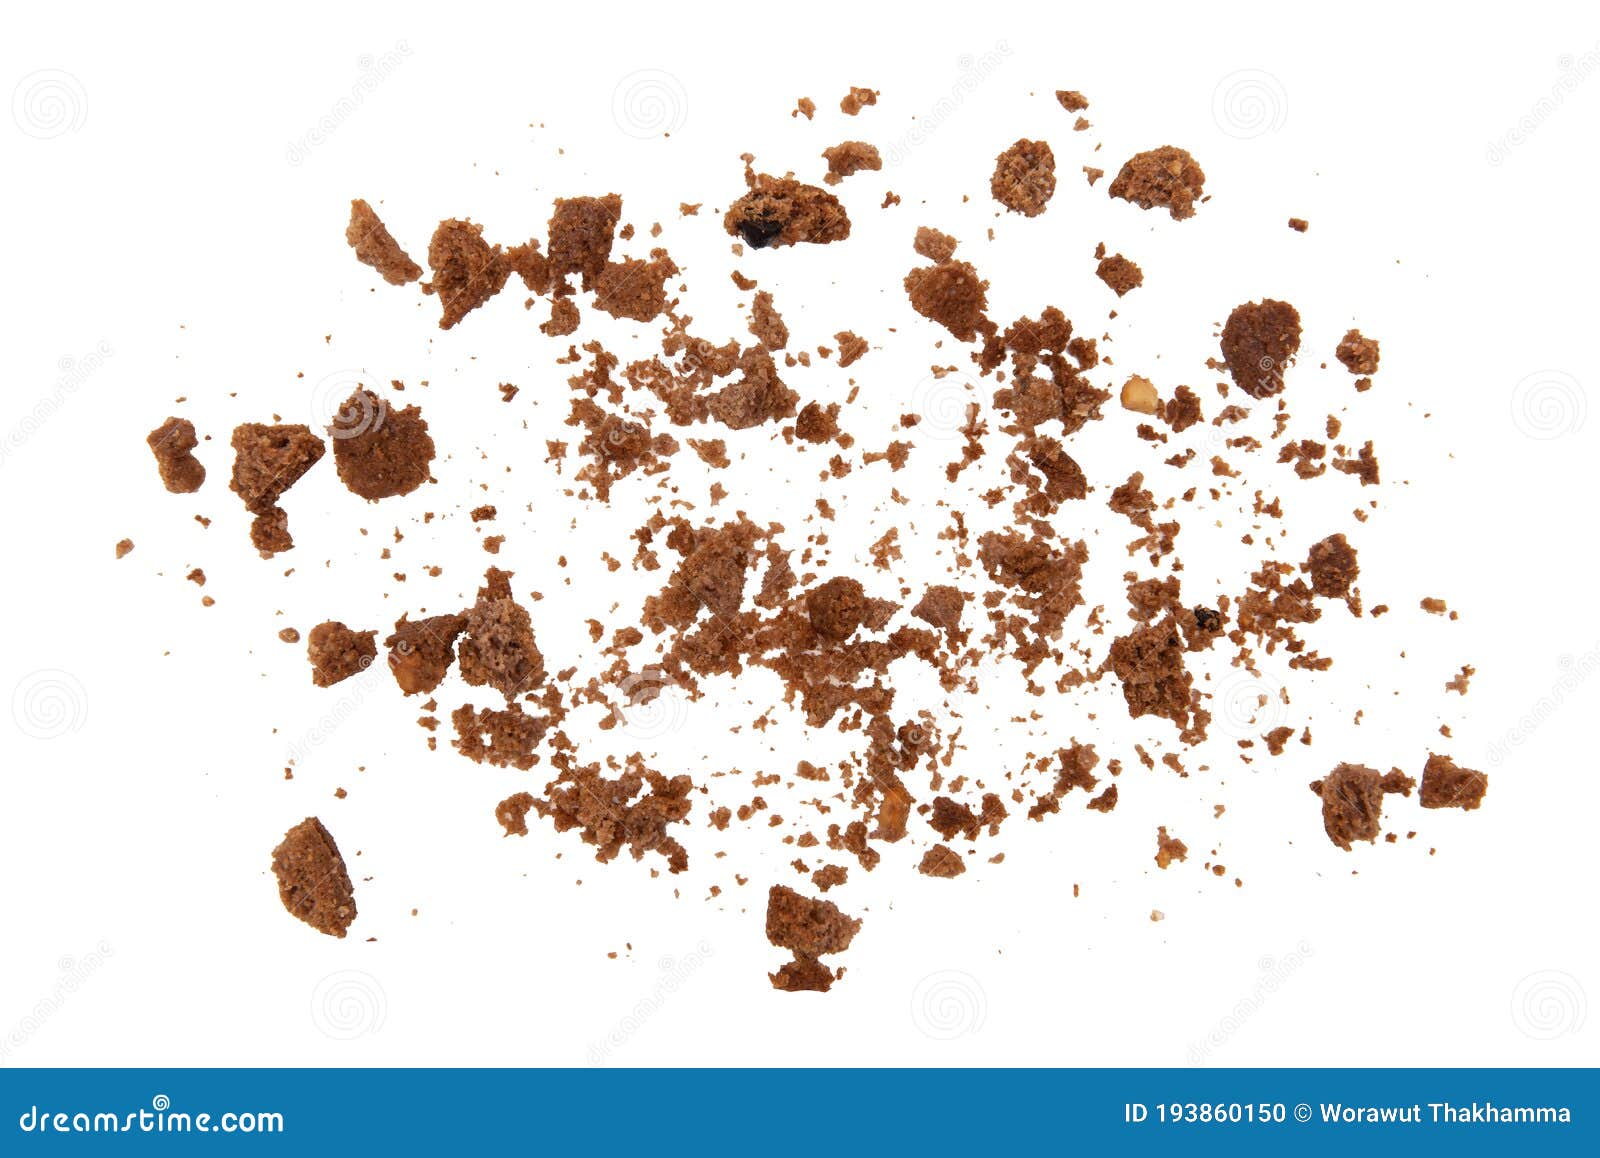 chocolate cookie crumbs on a white background.